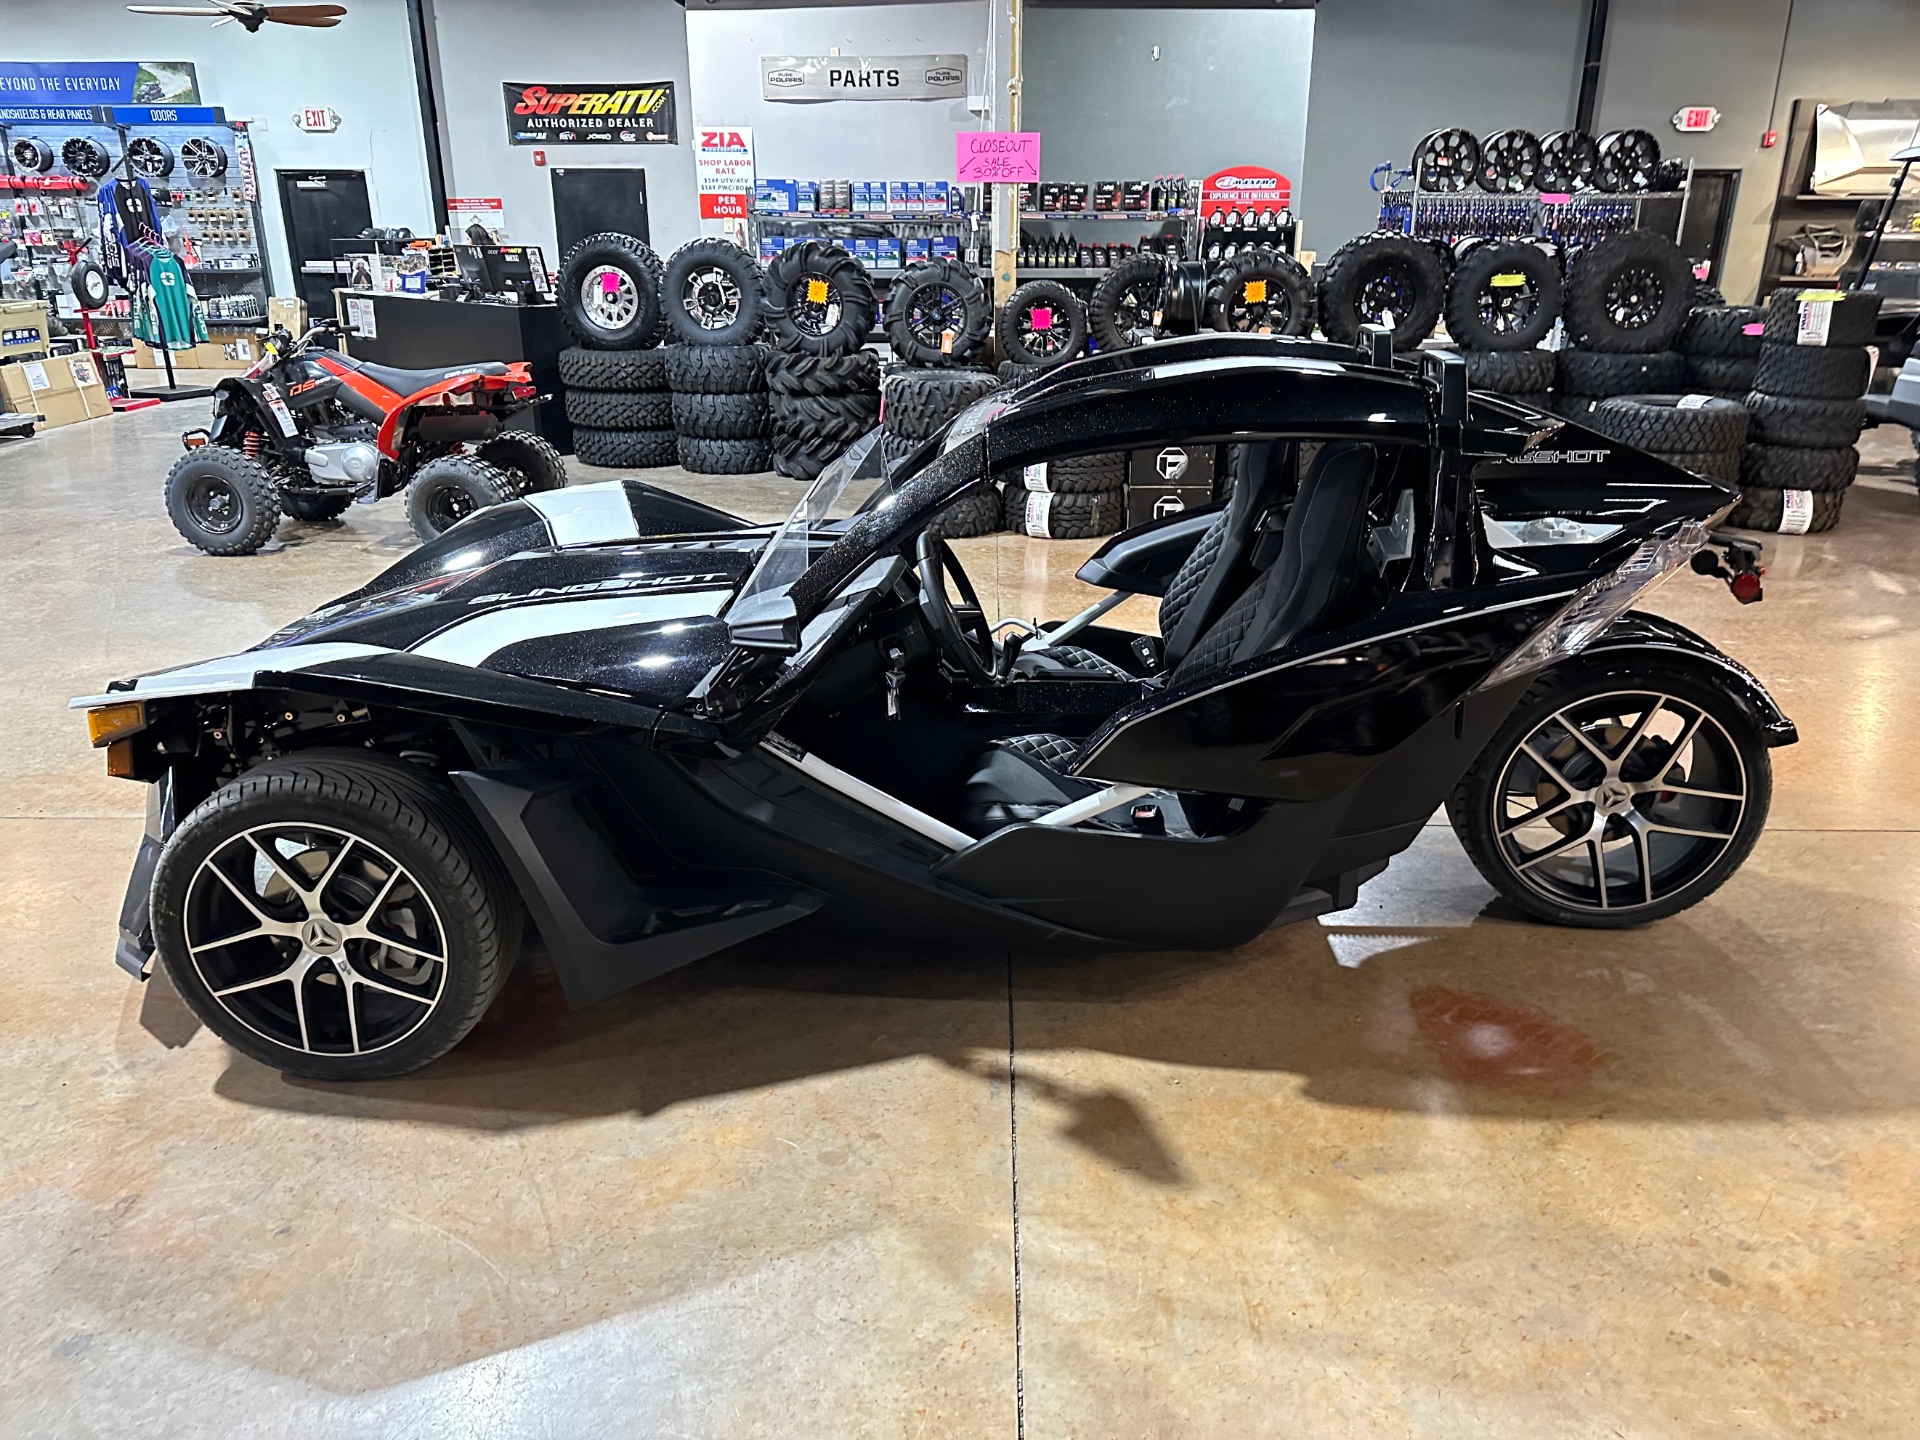 2019 Slingshot Slingshot Grand Touring in Roswell, New Mexico - Photo 6